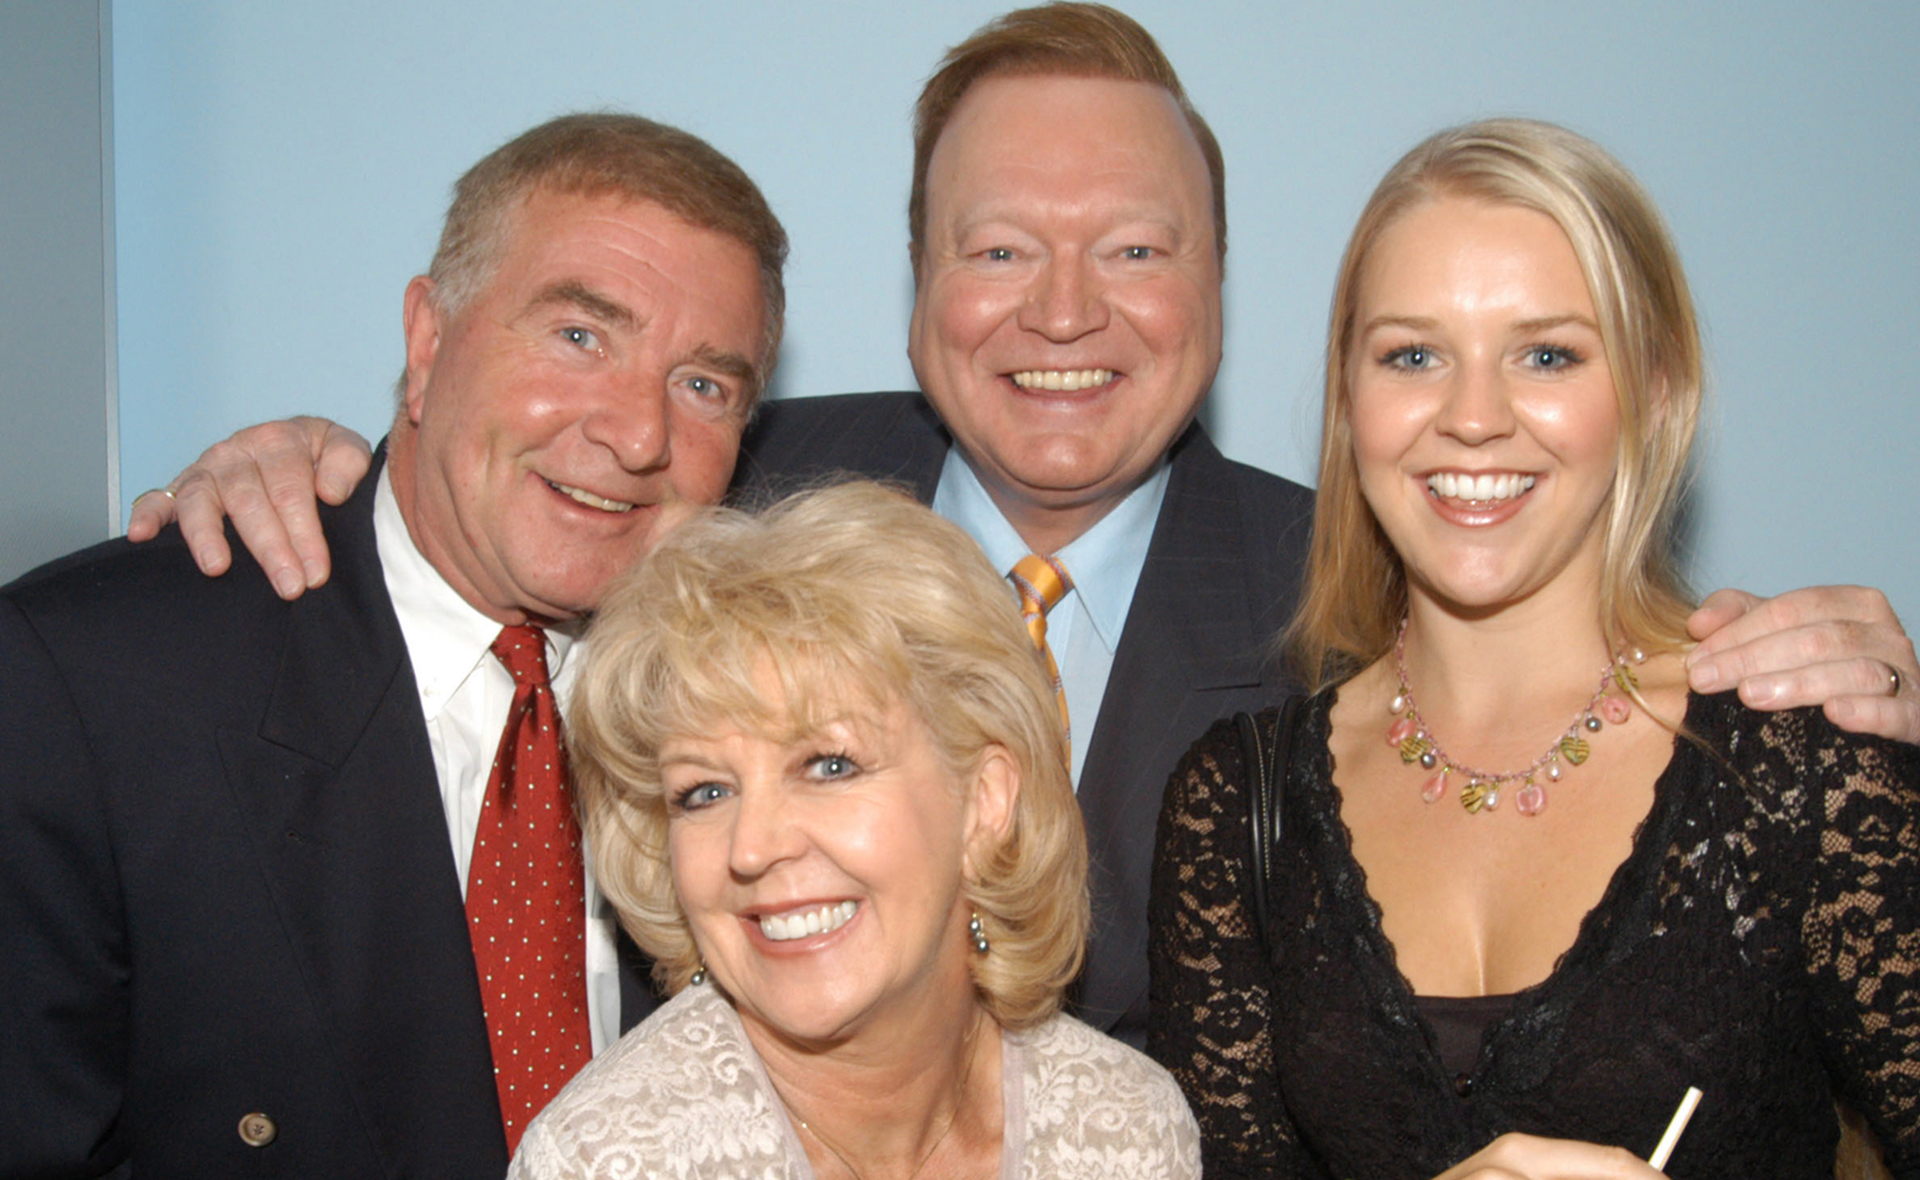 Farewell to a TV legend: Tributes flood in for Bert Newton after his tragic passing